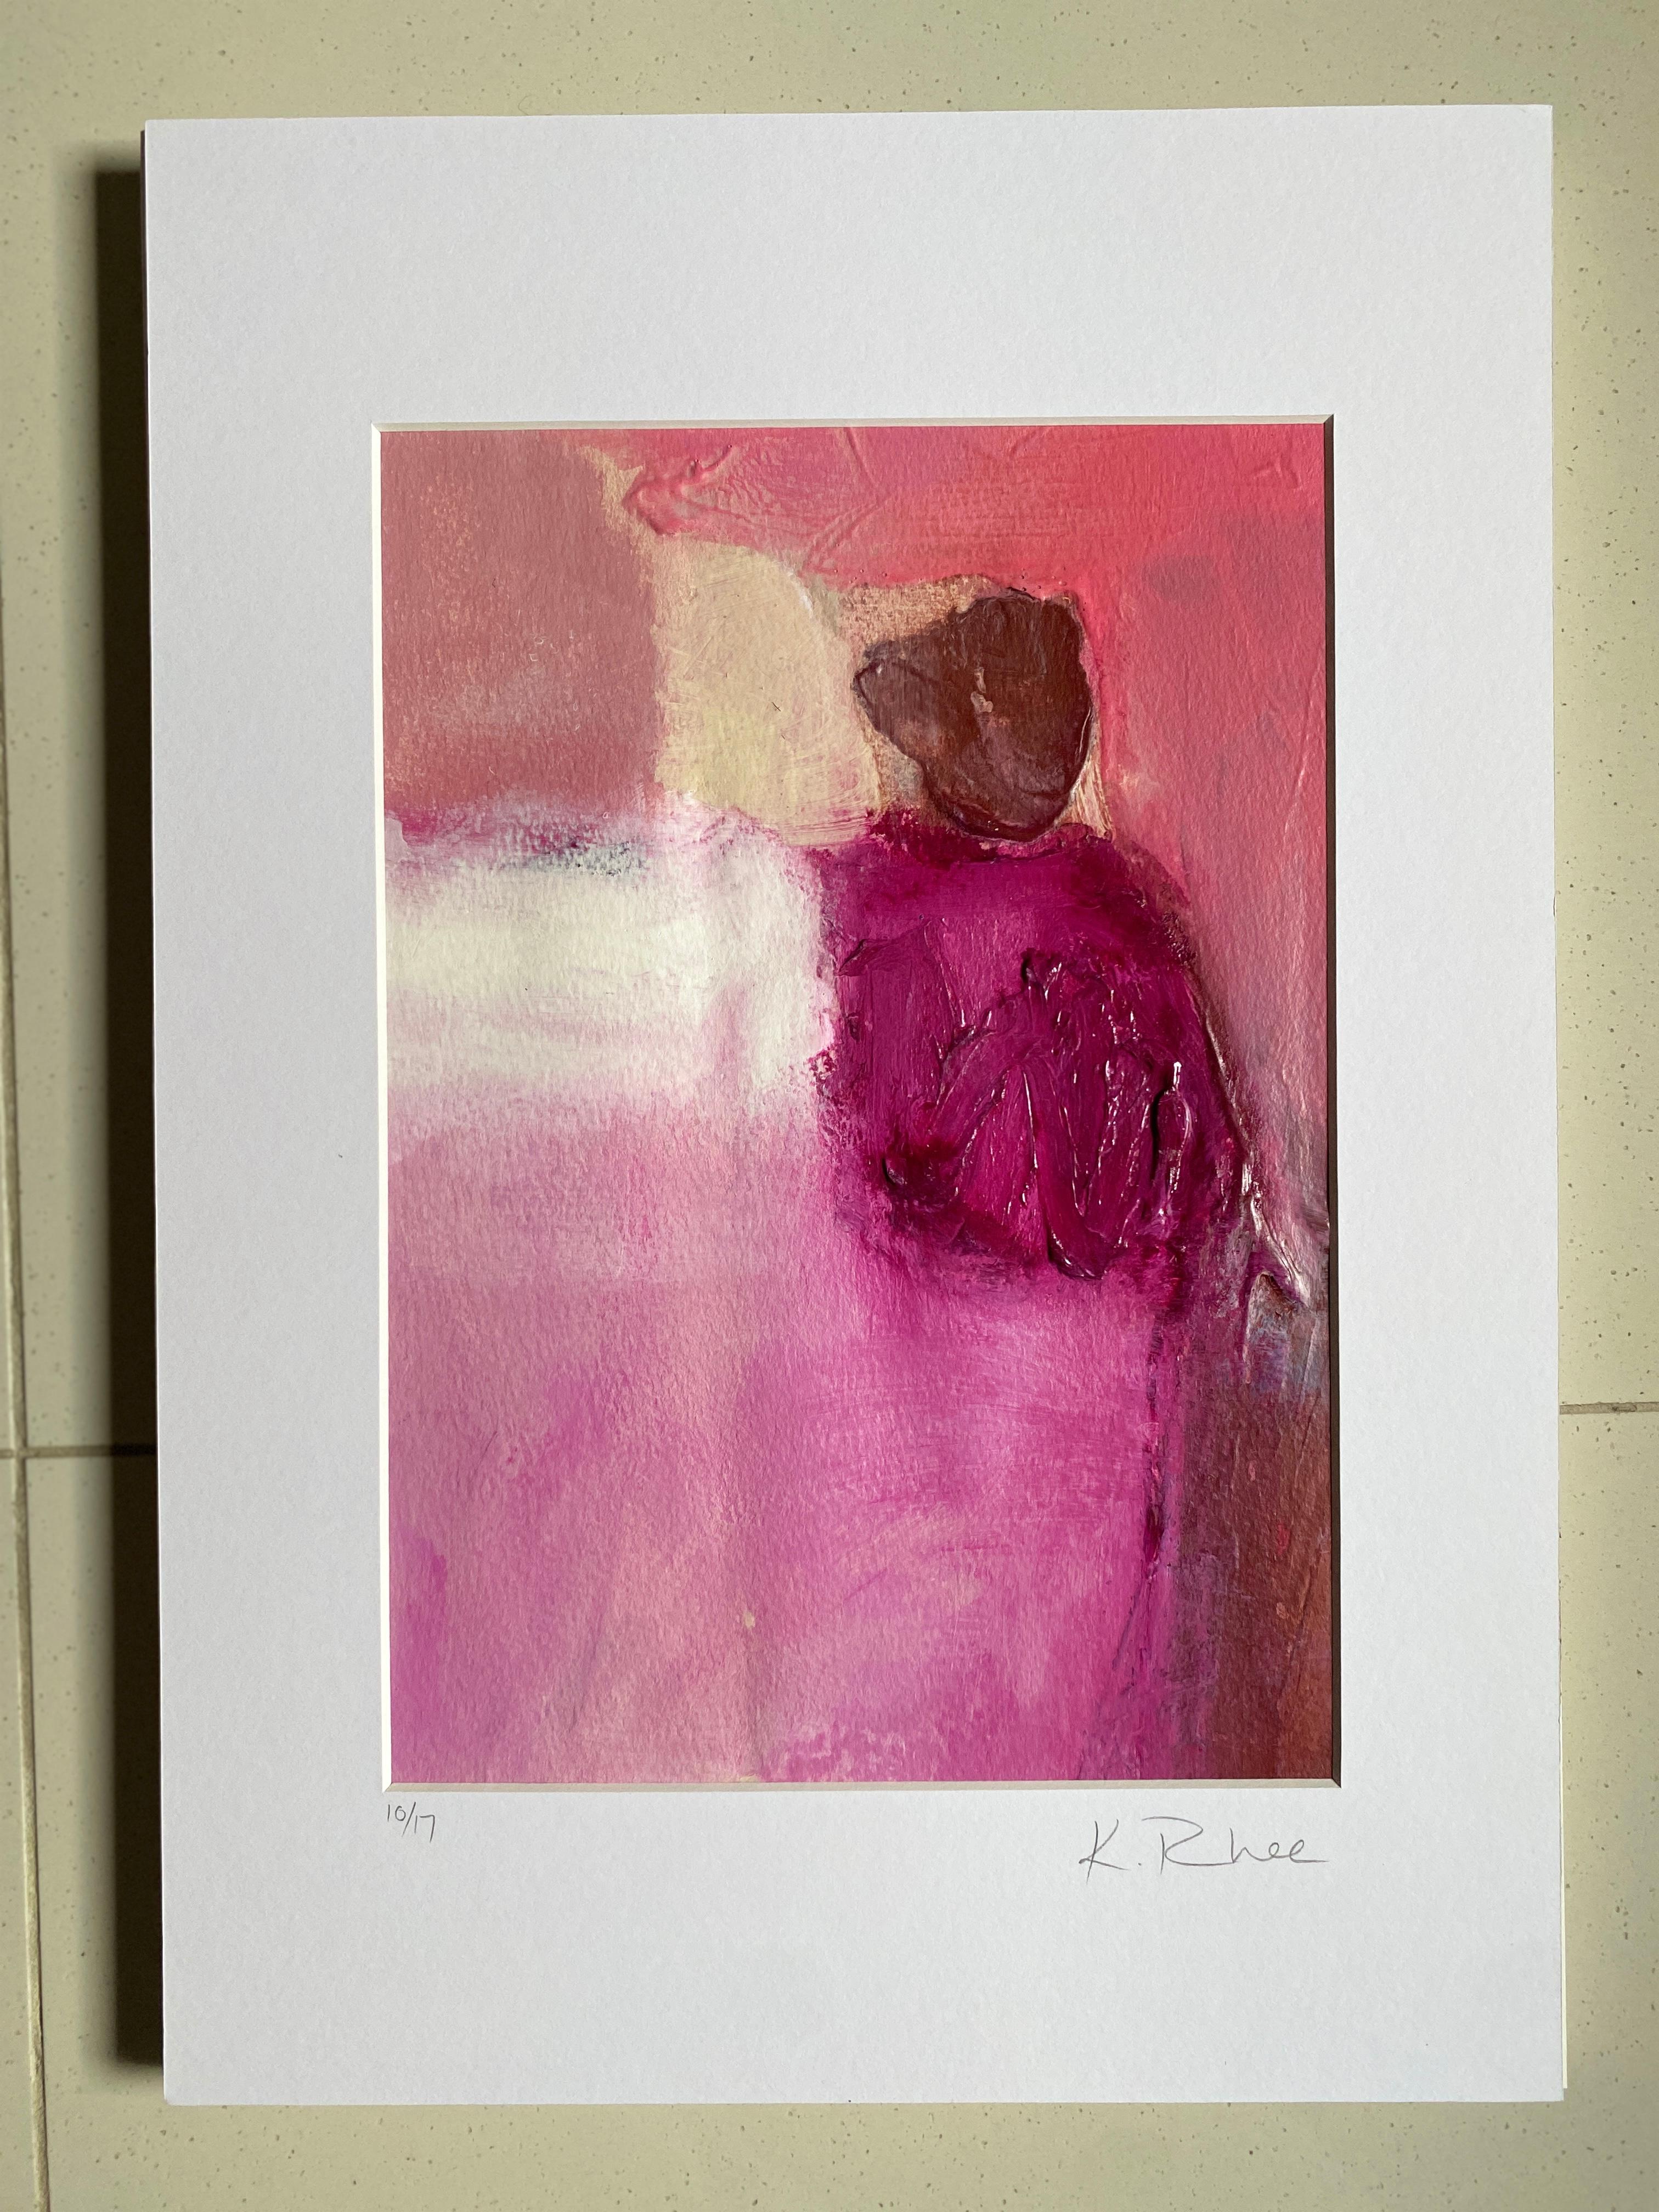 This is a small series of works on paper titled 'Abstract Forms' exploring natural forms, textures and surfaces of mother nature. Created to invoke positive, calm energy in colours of sand, rose pink, tan and white.  This small work is heavily